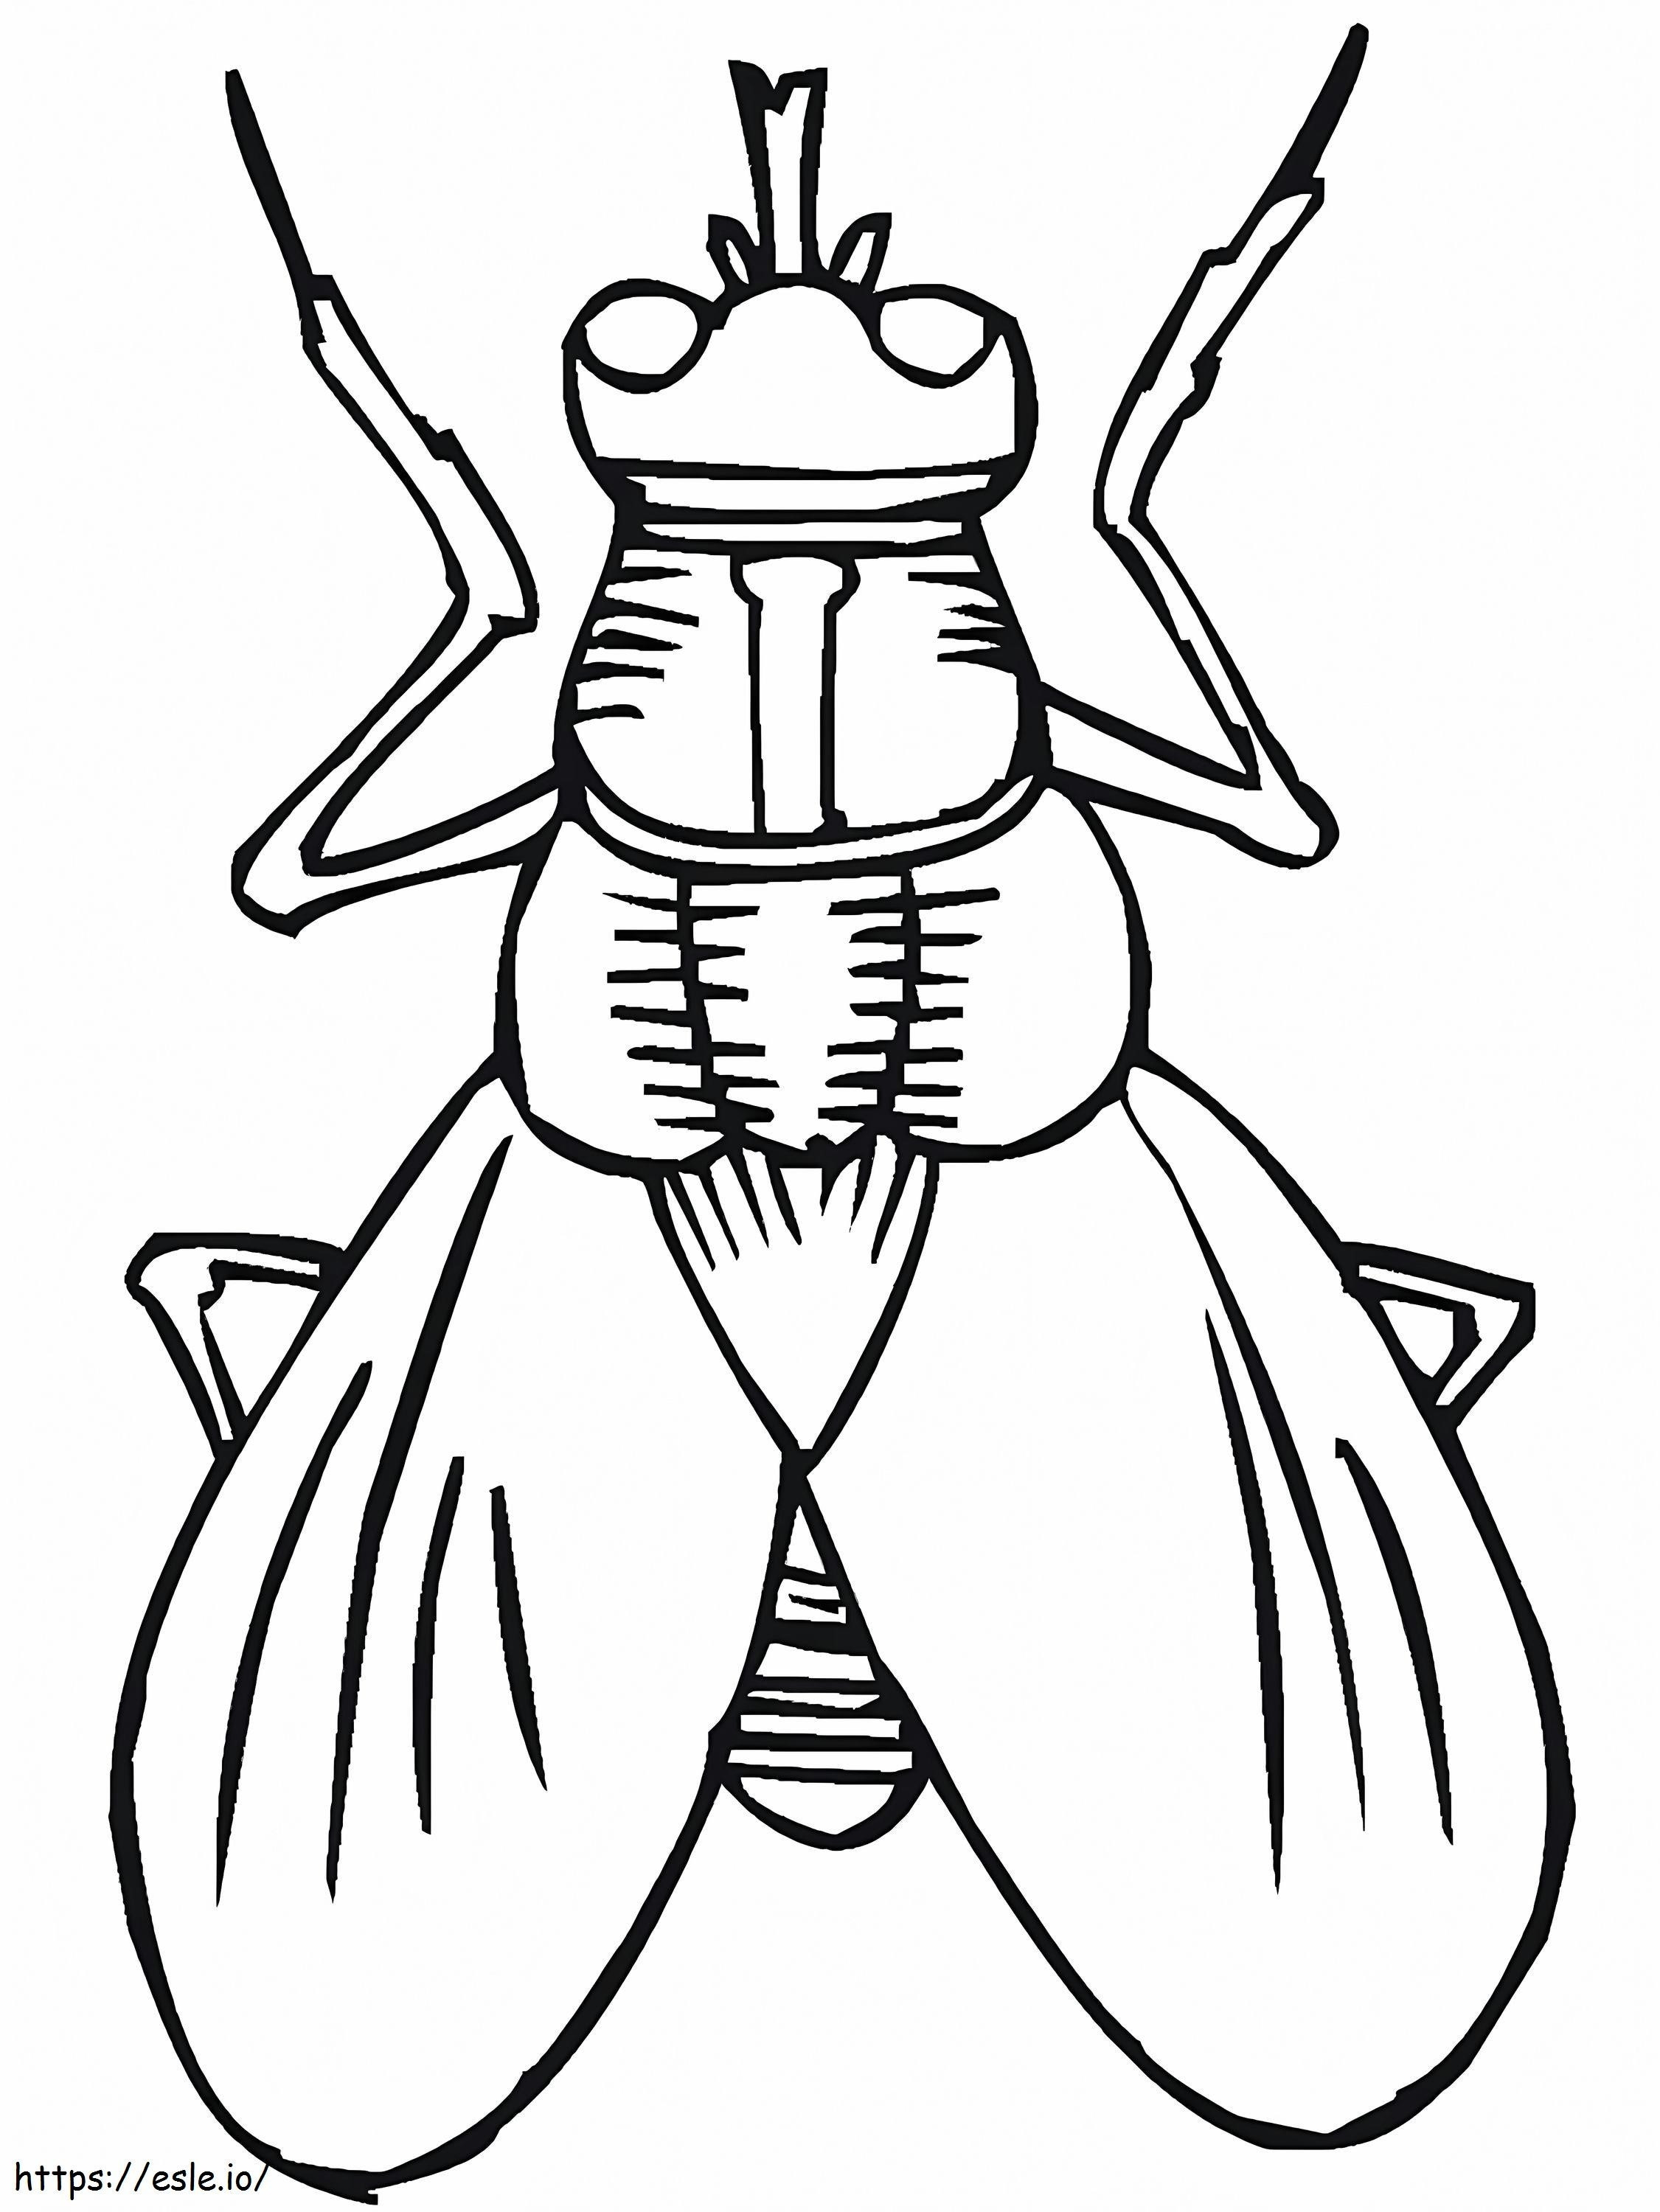 Flies coloring page